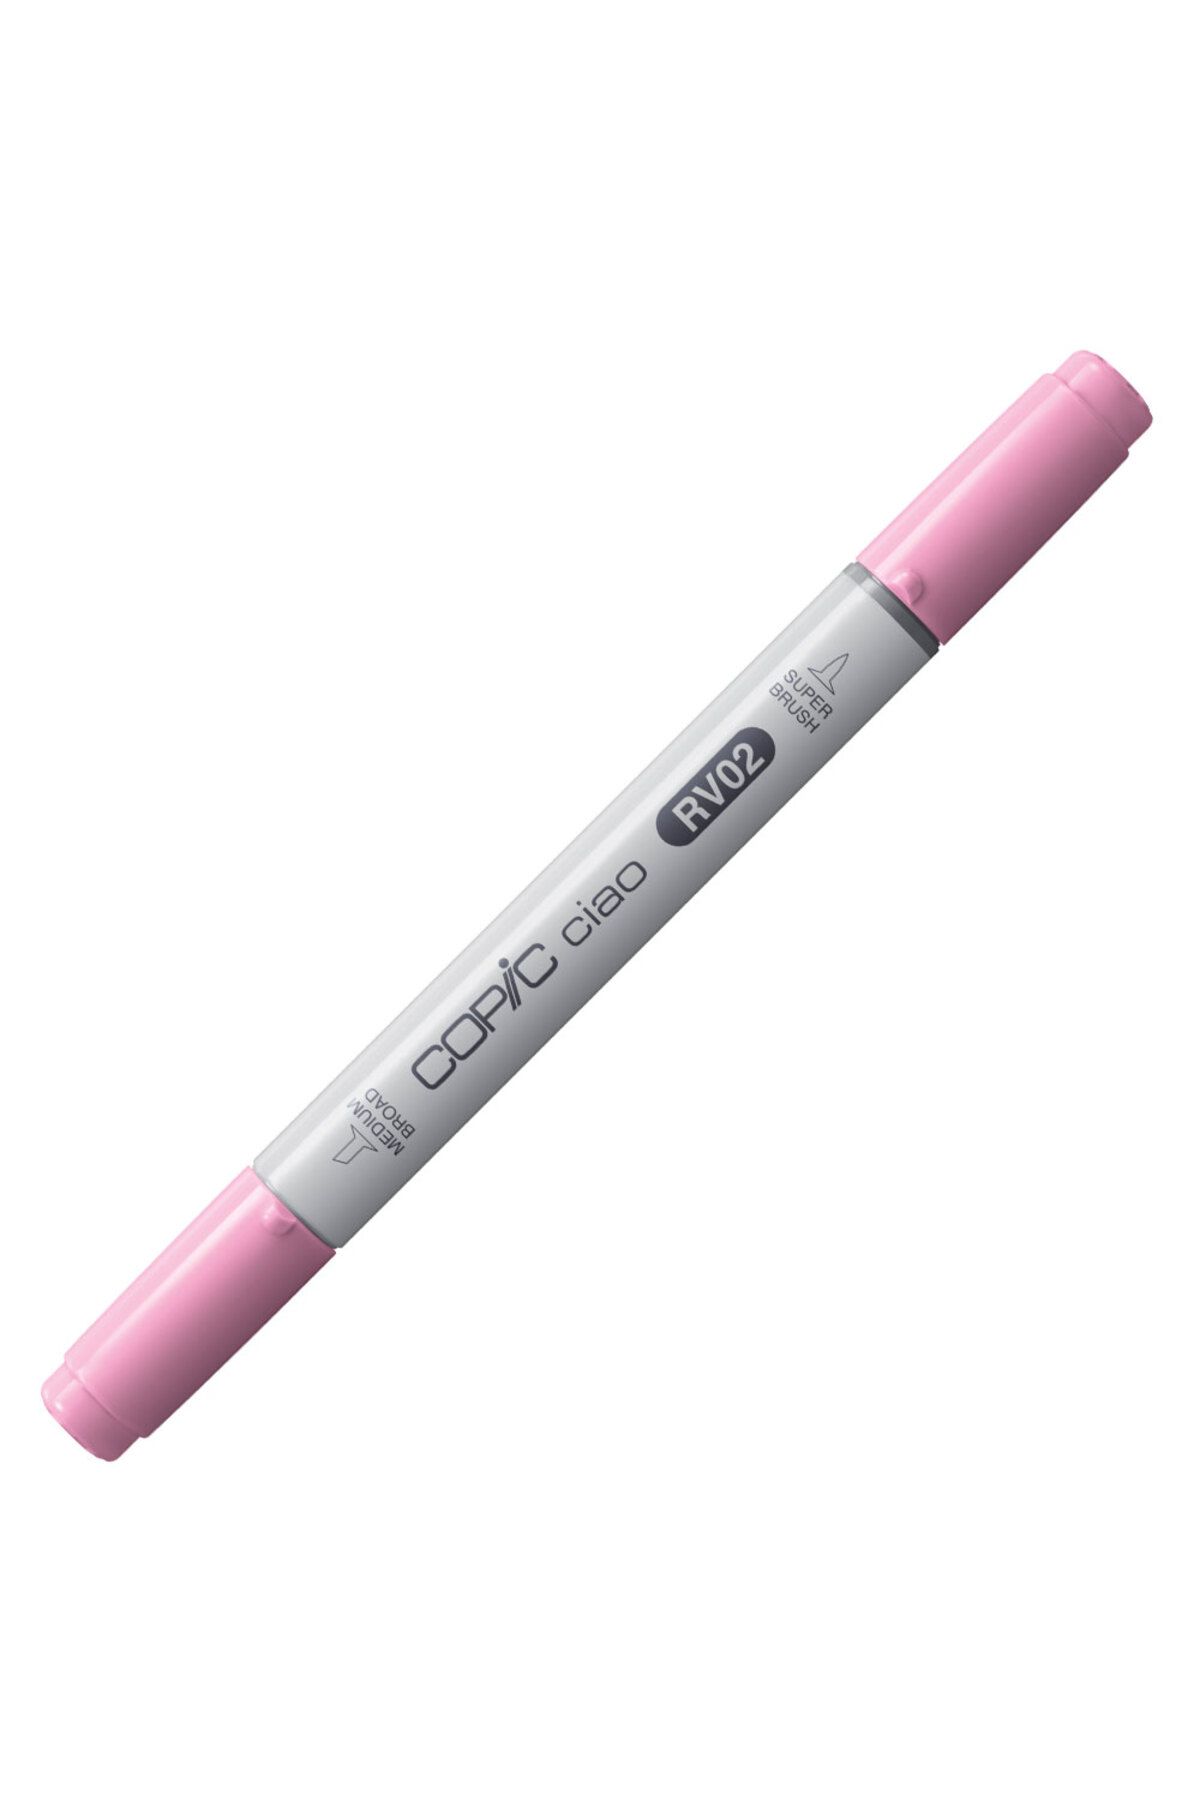 copic Ciao Marker Kalem Rv02 Sugared Almond Pink 22 075 176